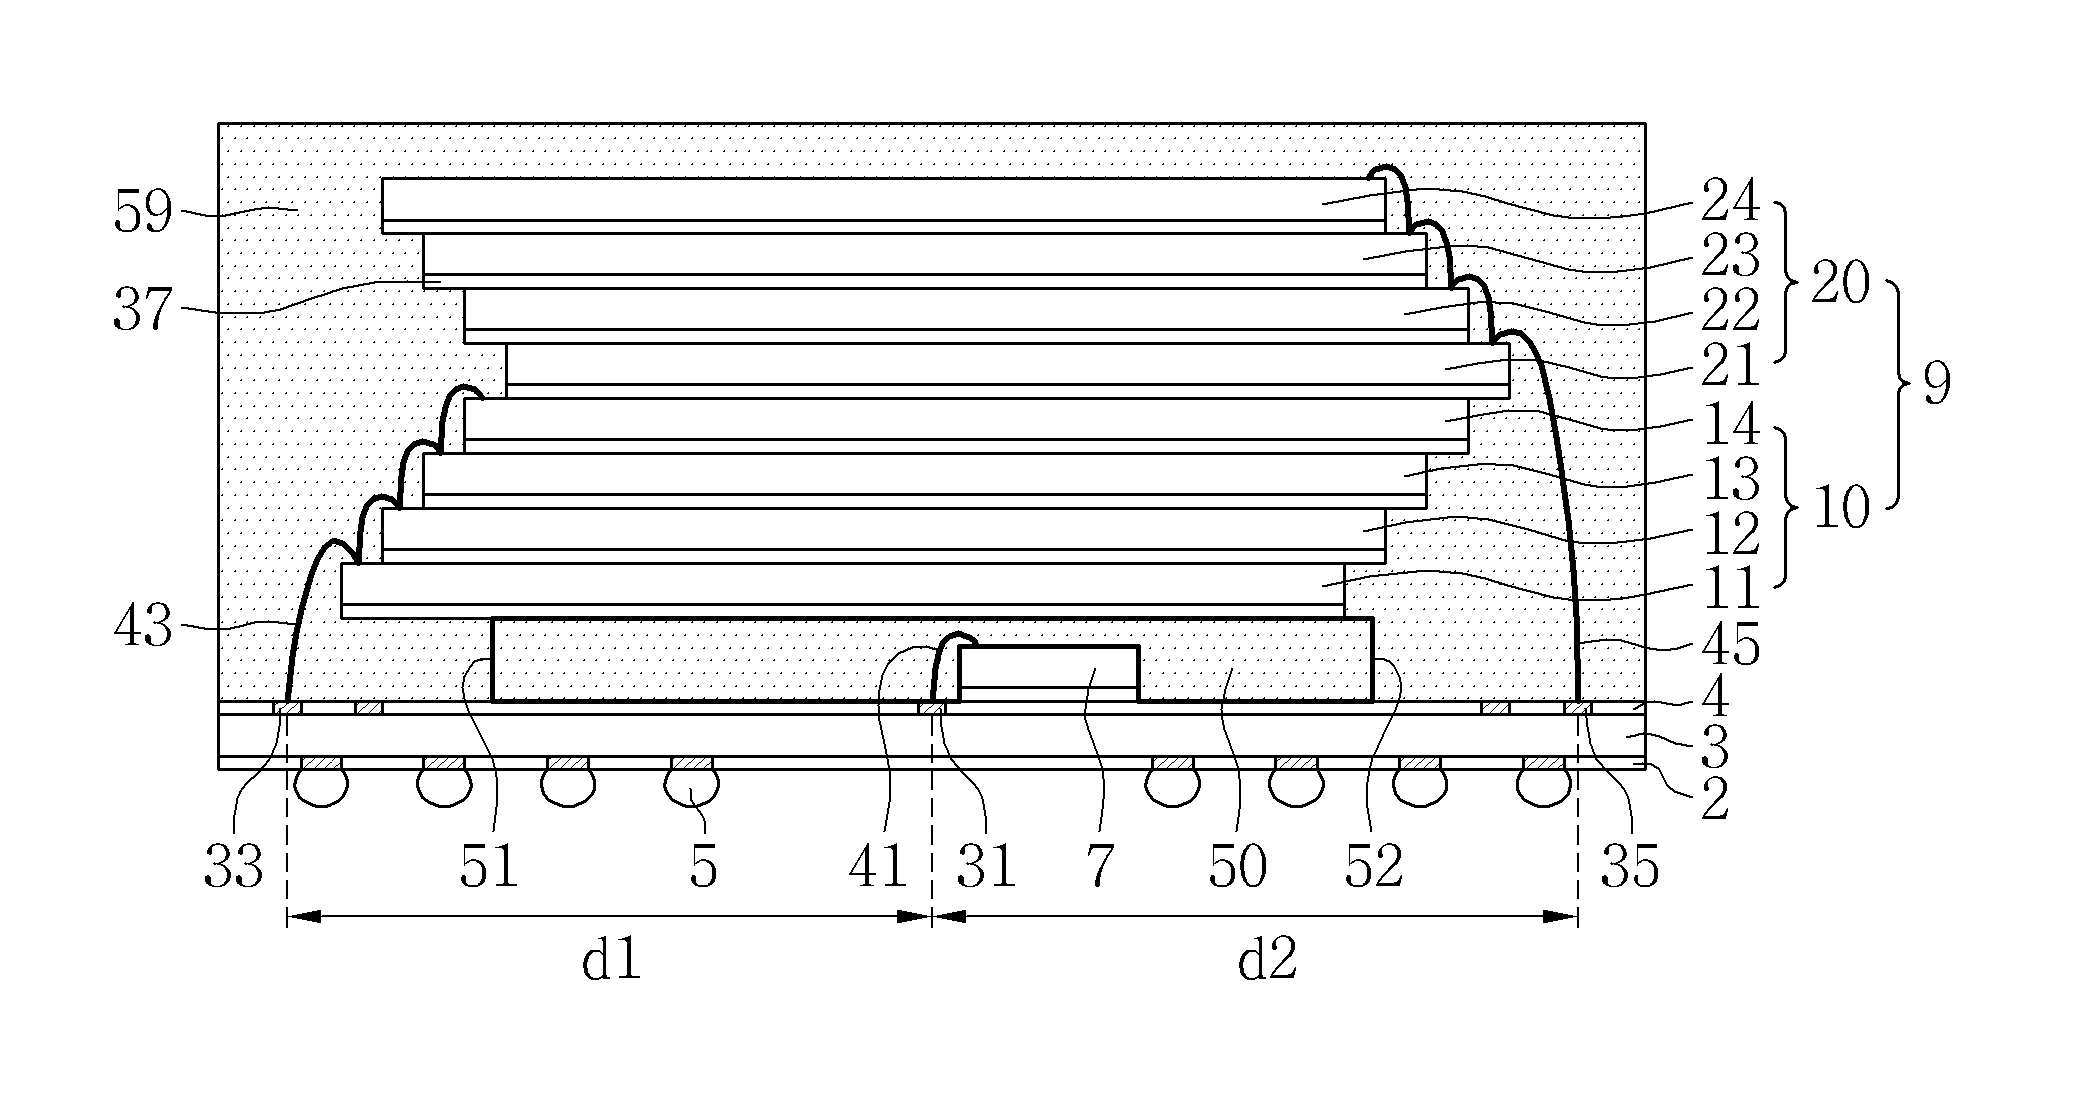 Semiconductor package having plural semiconductor chips and method of forming the same